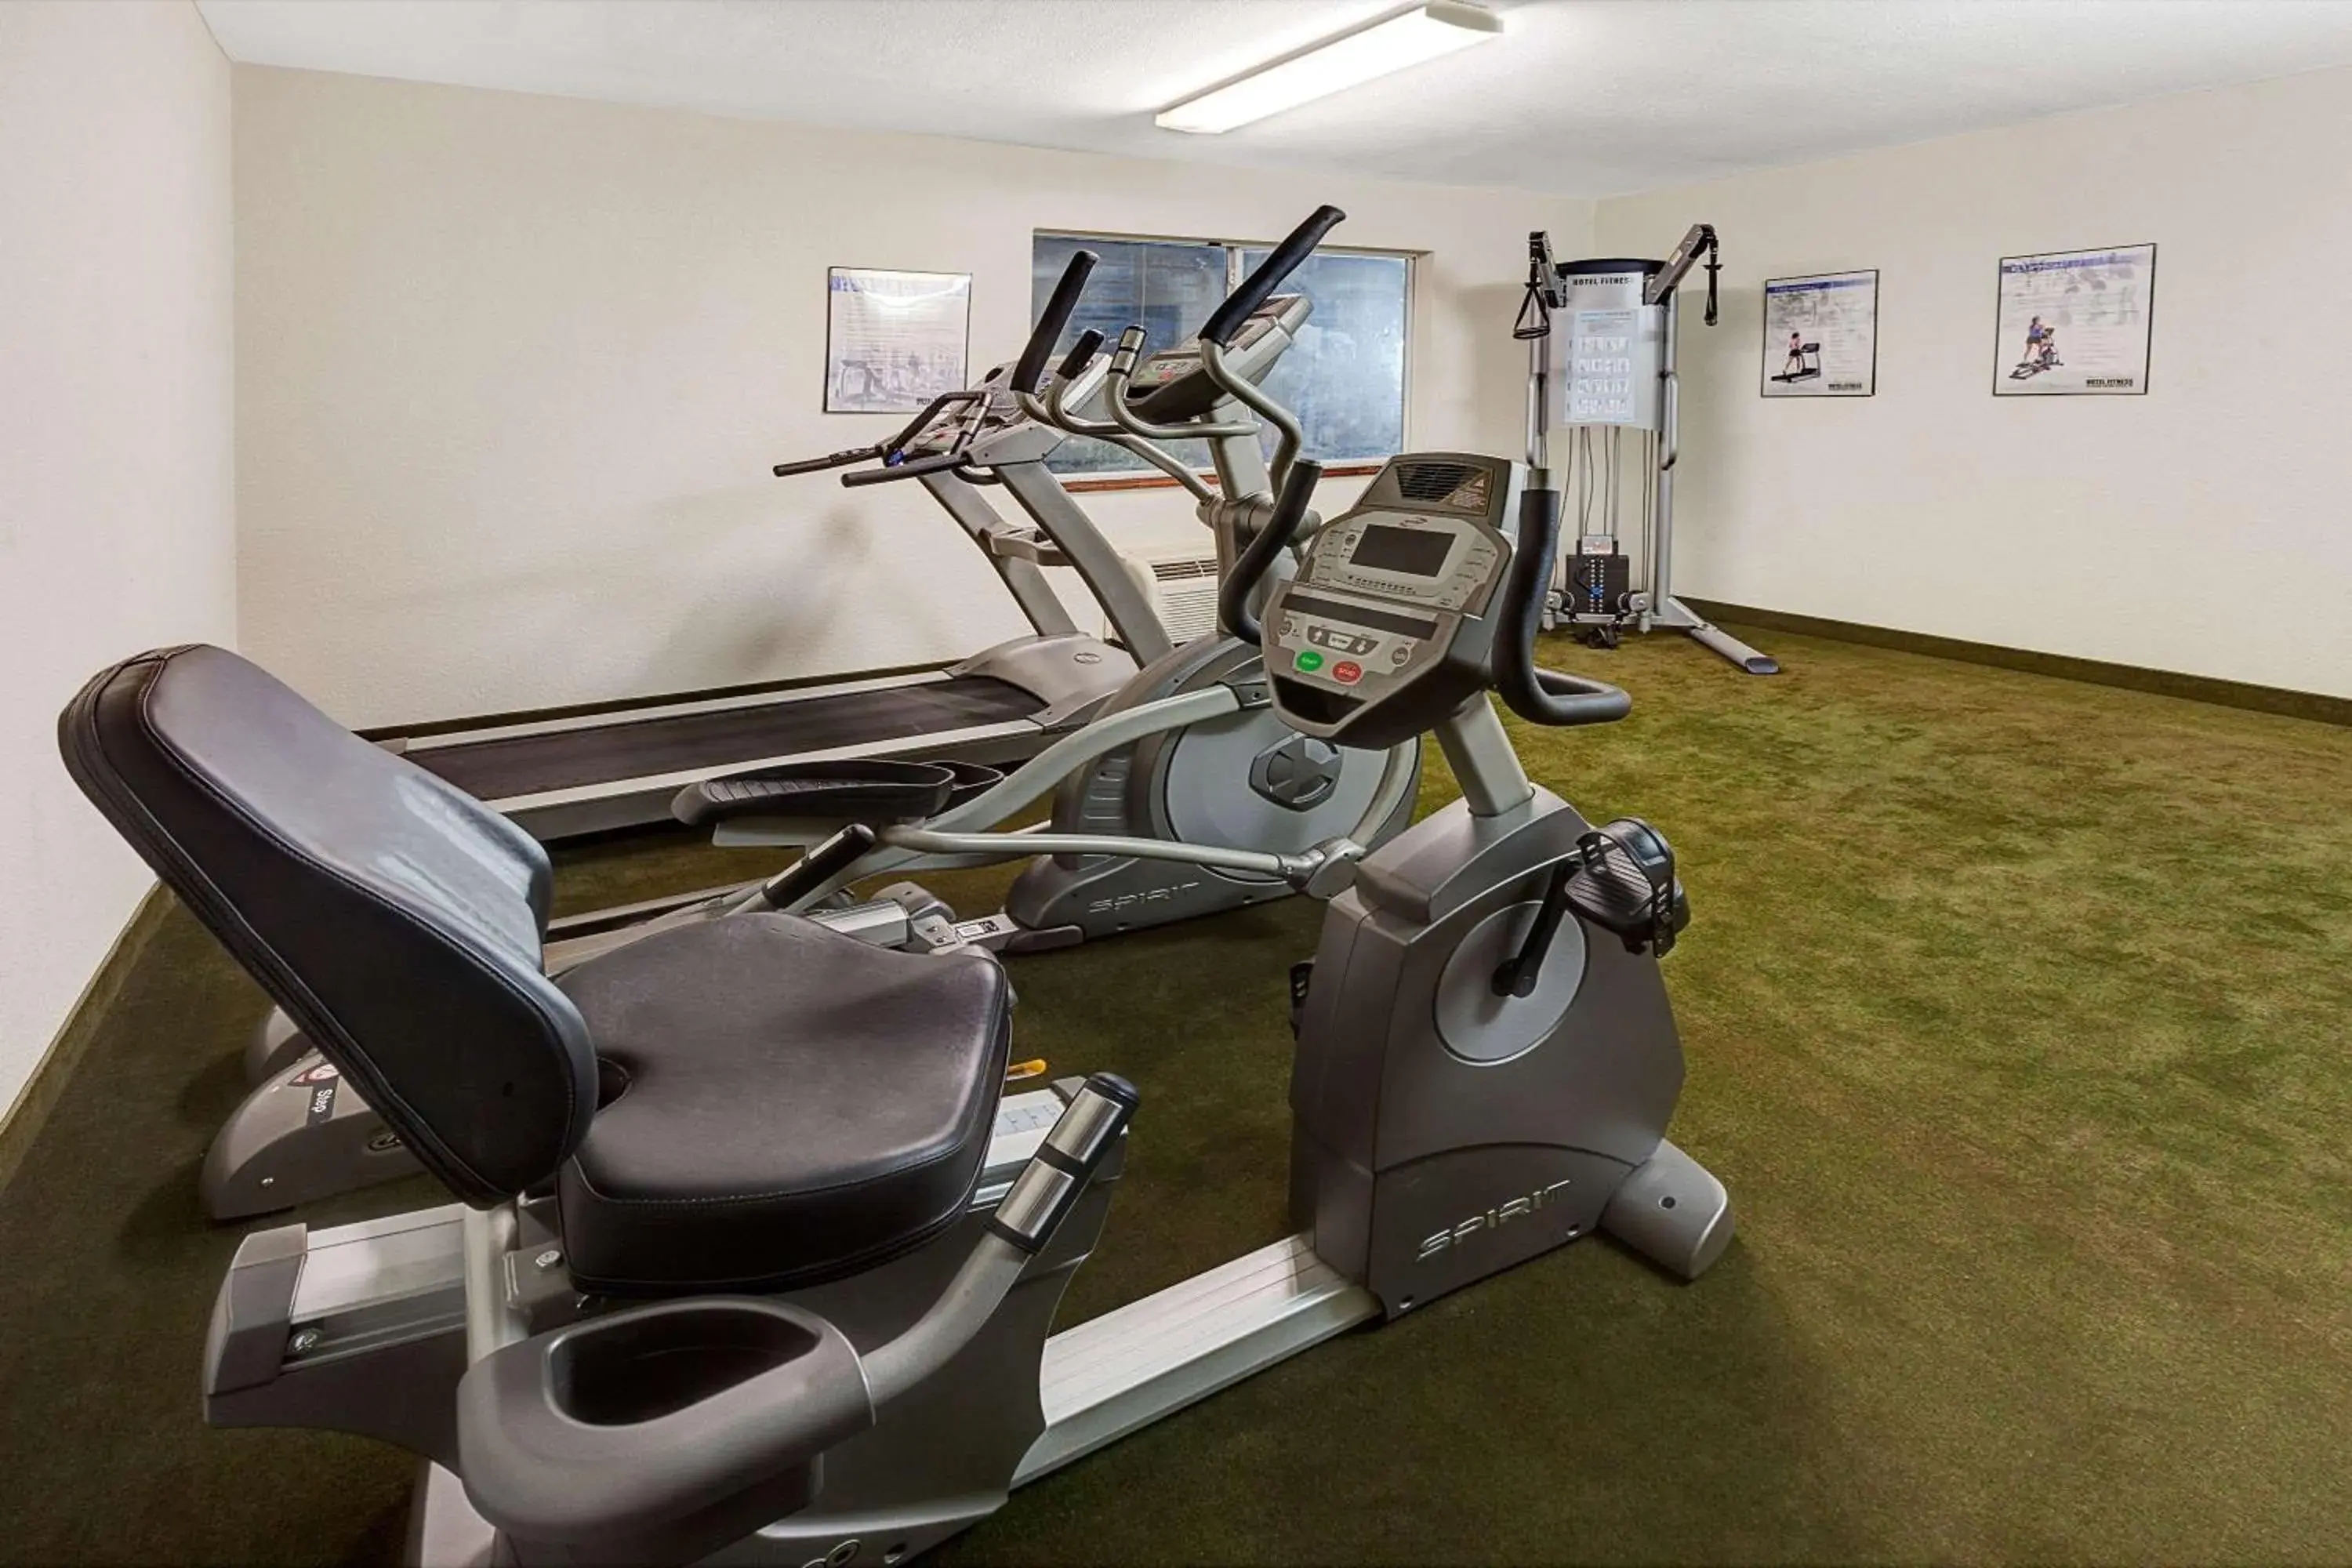 Fitness centre/facilities, Fitness Center/Facilities in Baymont by Wyndham El Reno